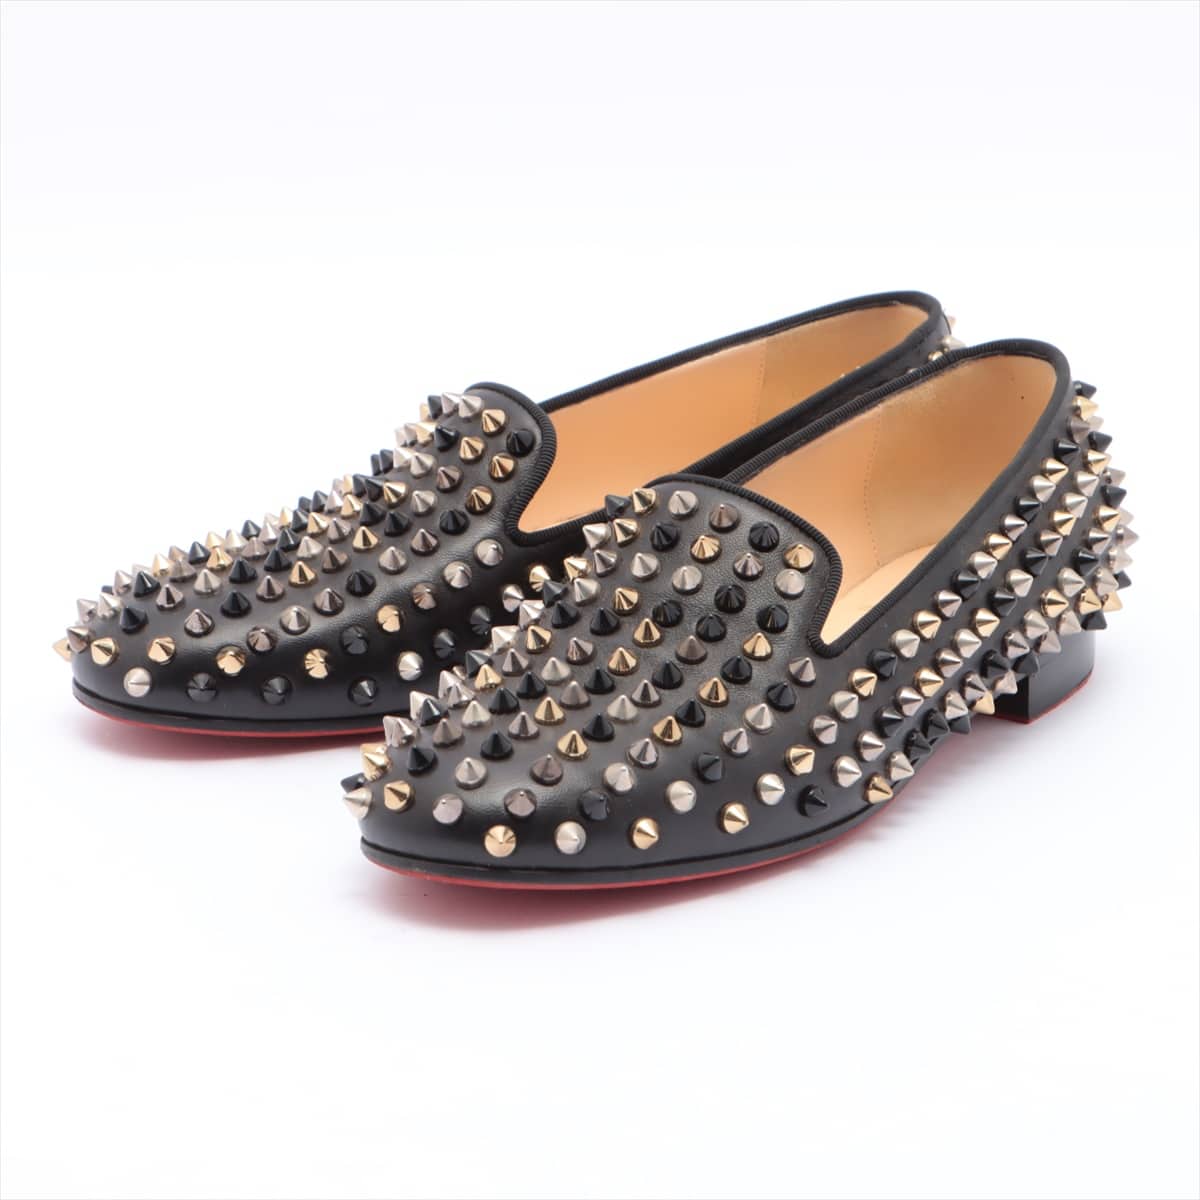 Christian Louboutin Rollerboy Leather Loafer 35 1/2 Ladies' Black Resoled.